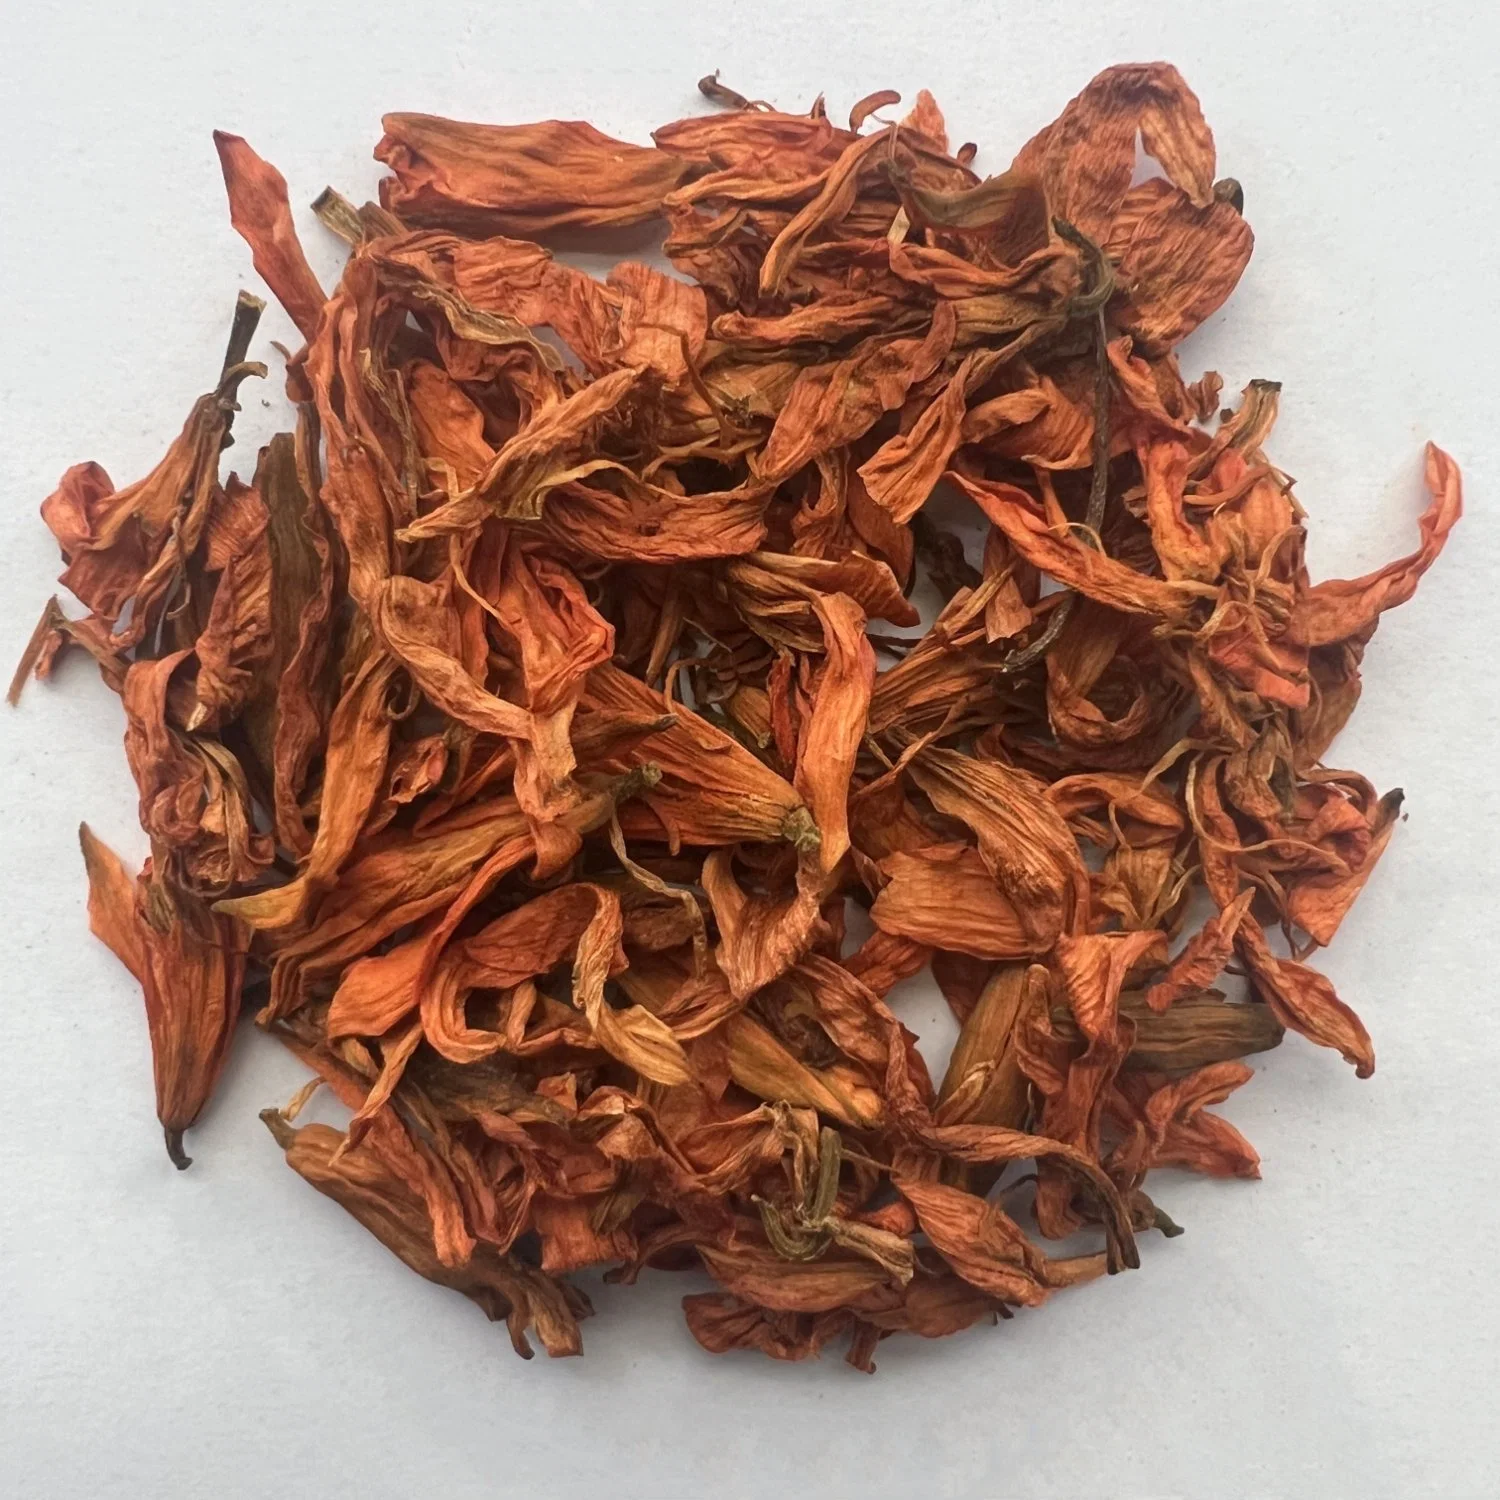 Chinese Medicinal Bai He Hua Health Food Natural Dried Lily Flower Tea for Sleeping